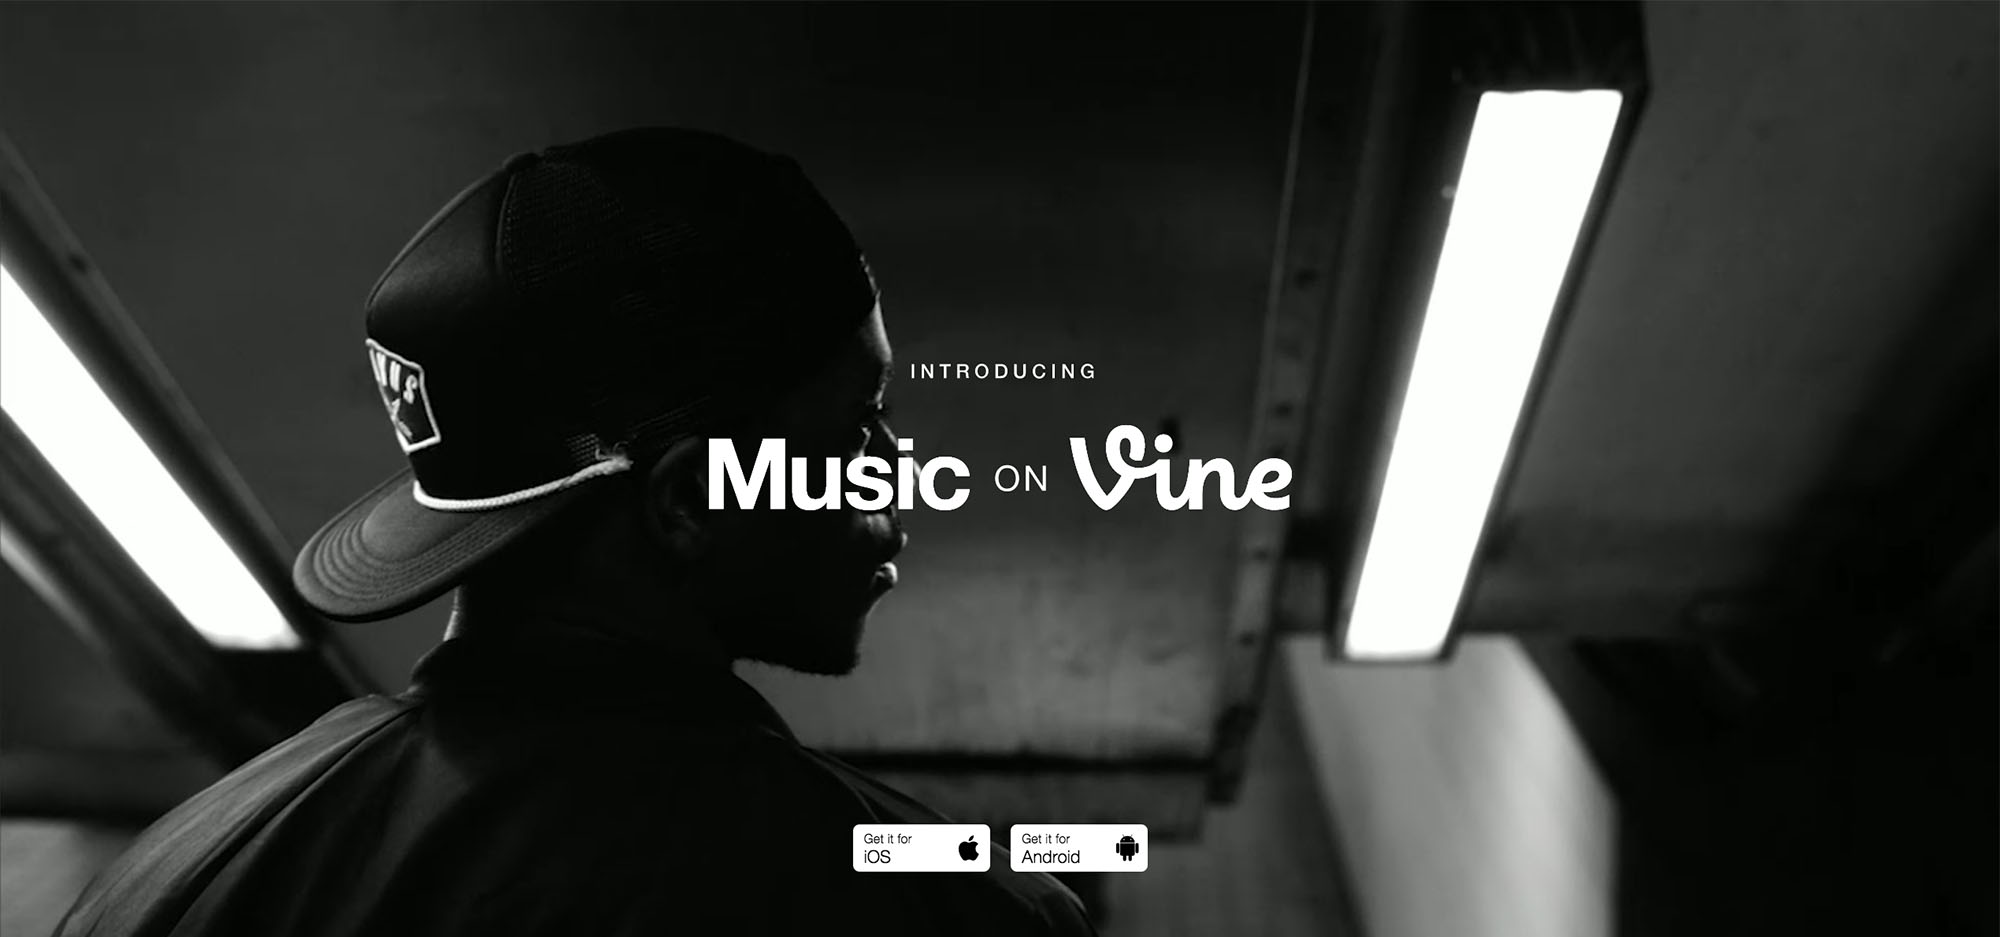 ‘Music on Vine’ Launched by Twitter